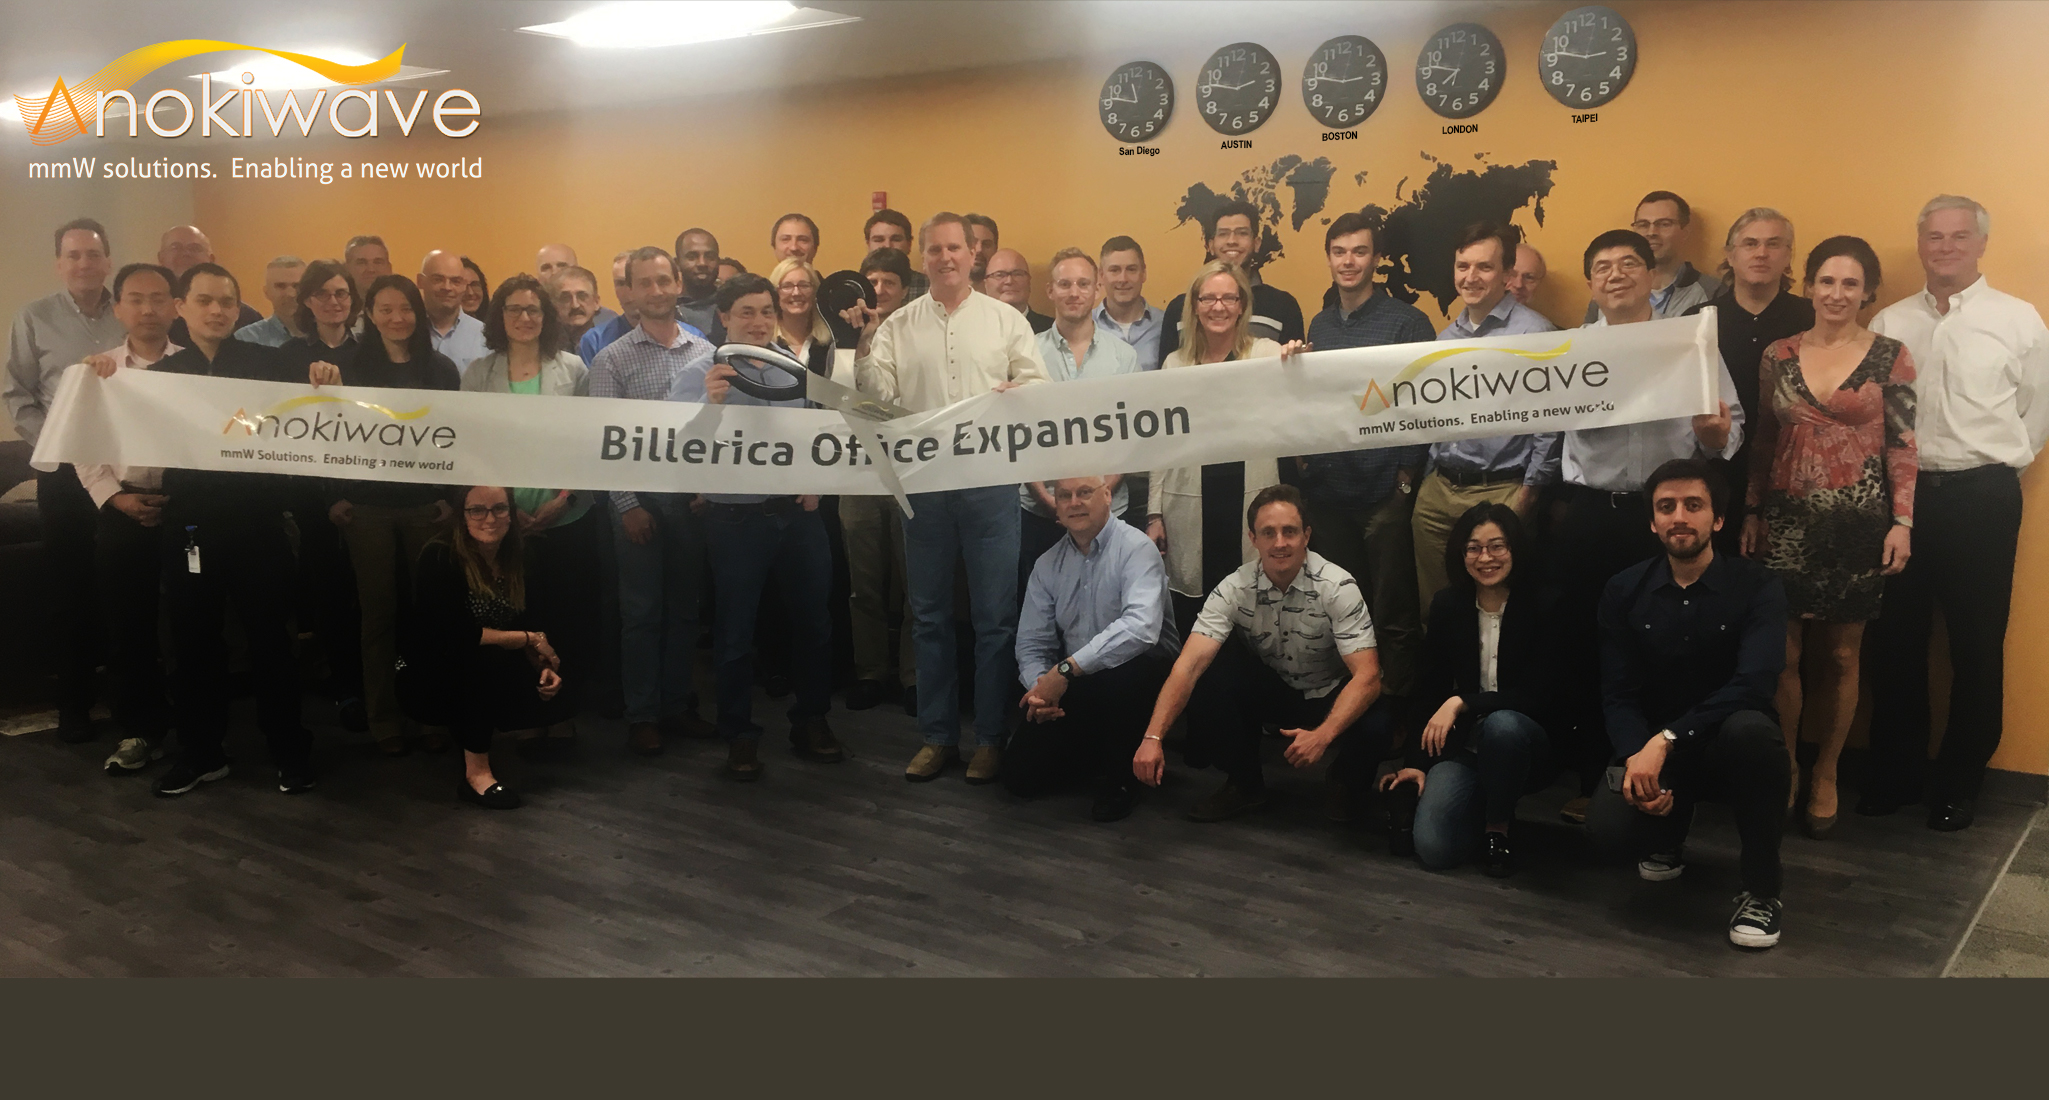 Anokiwave celebrates the expansion of the Billerica, MA office